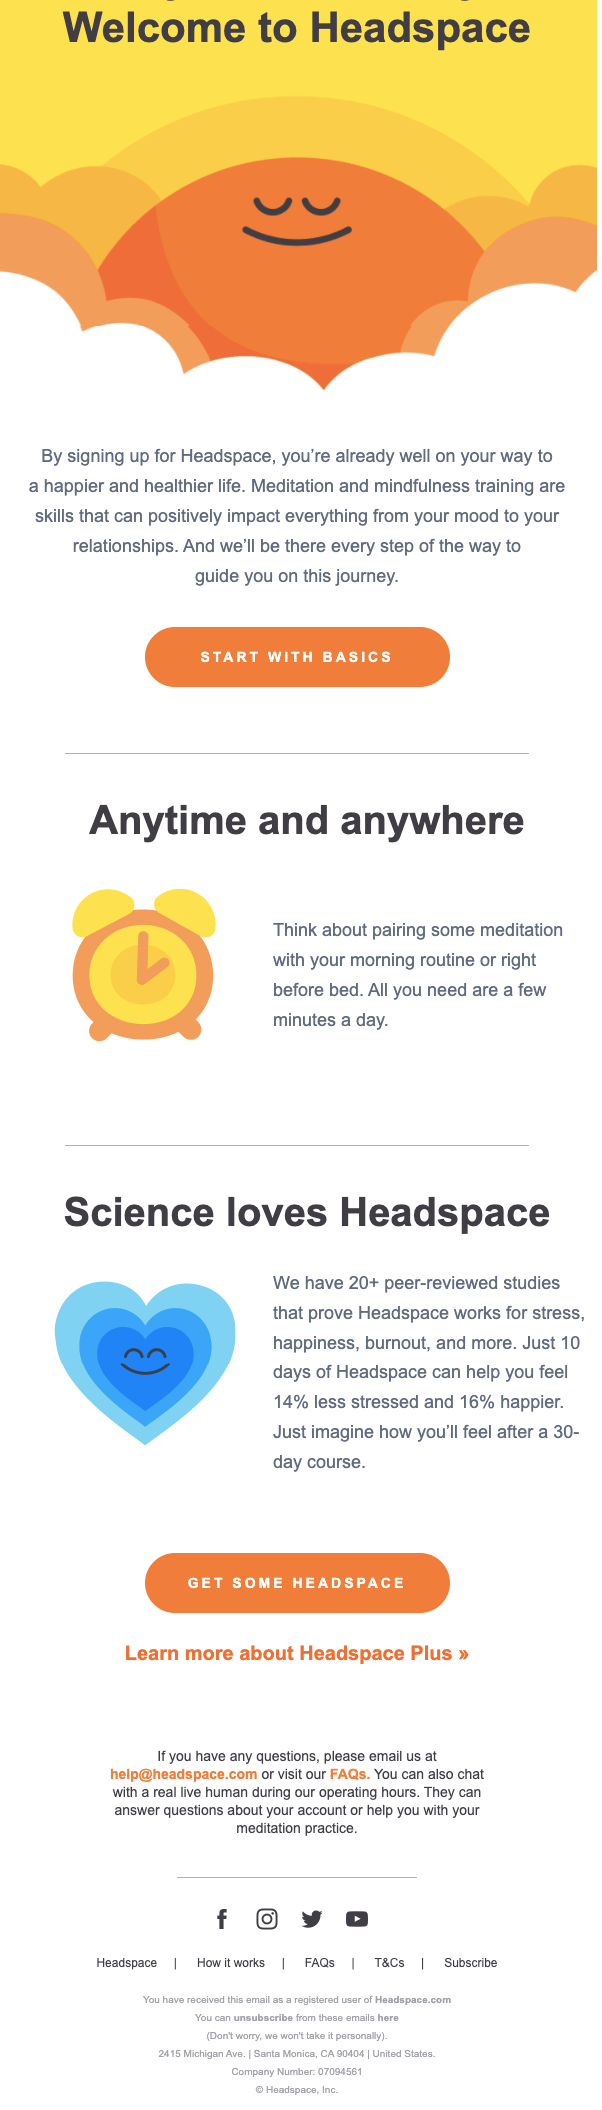 welcome email by headspace